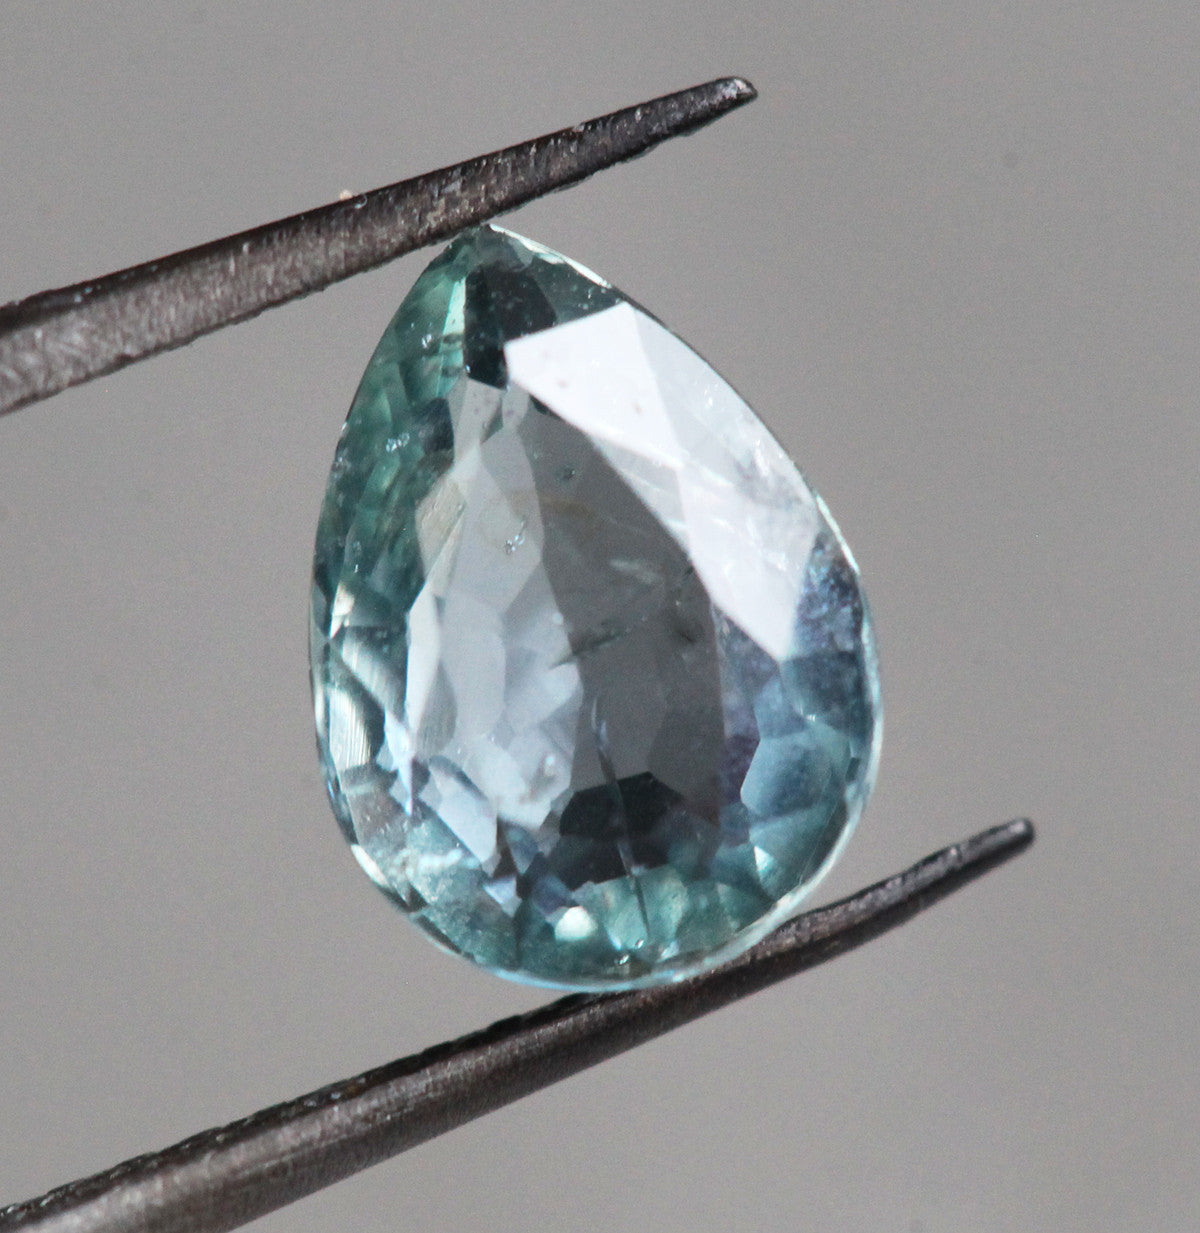 Loose pear-shaped mint green sapphire